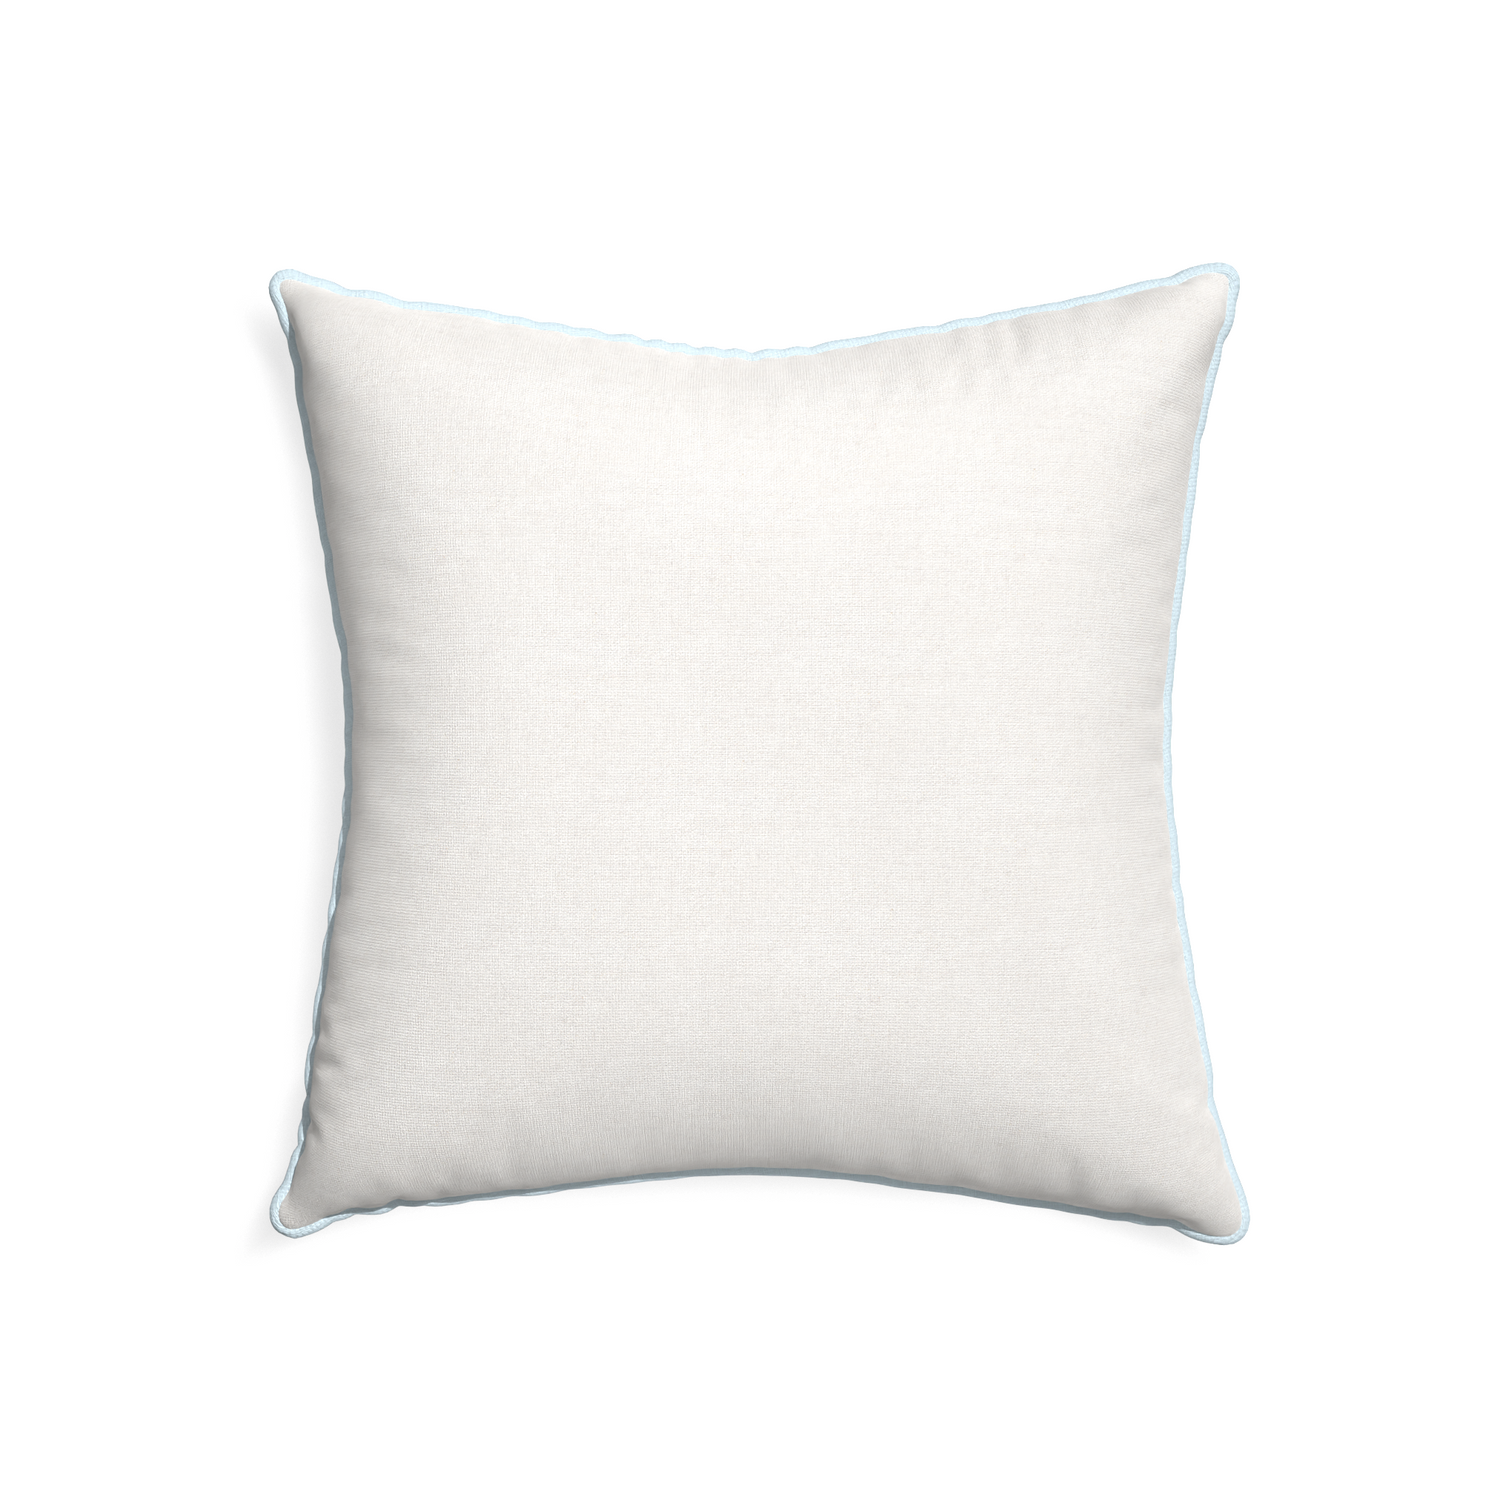 22-square flour custom pillow with powder piping on white background